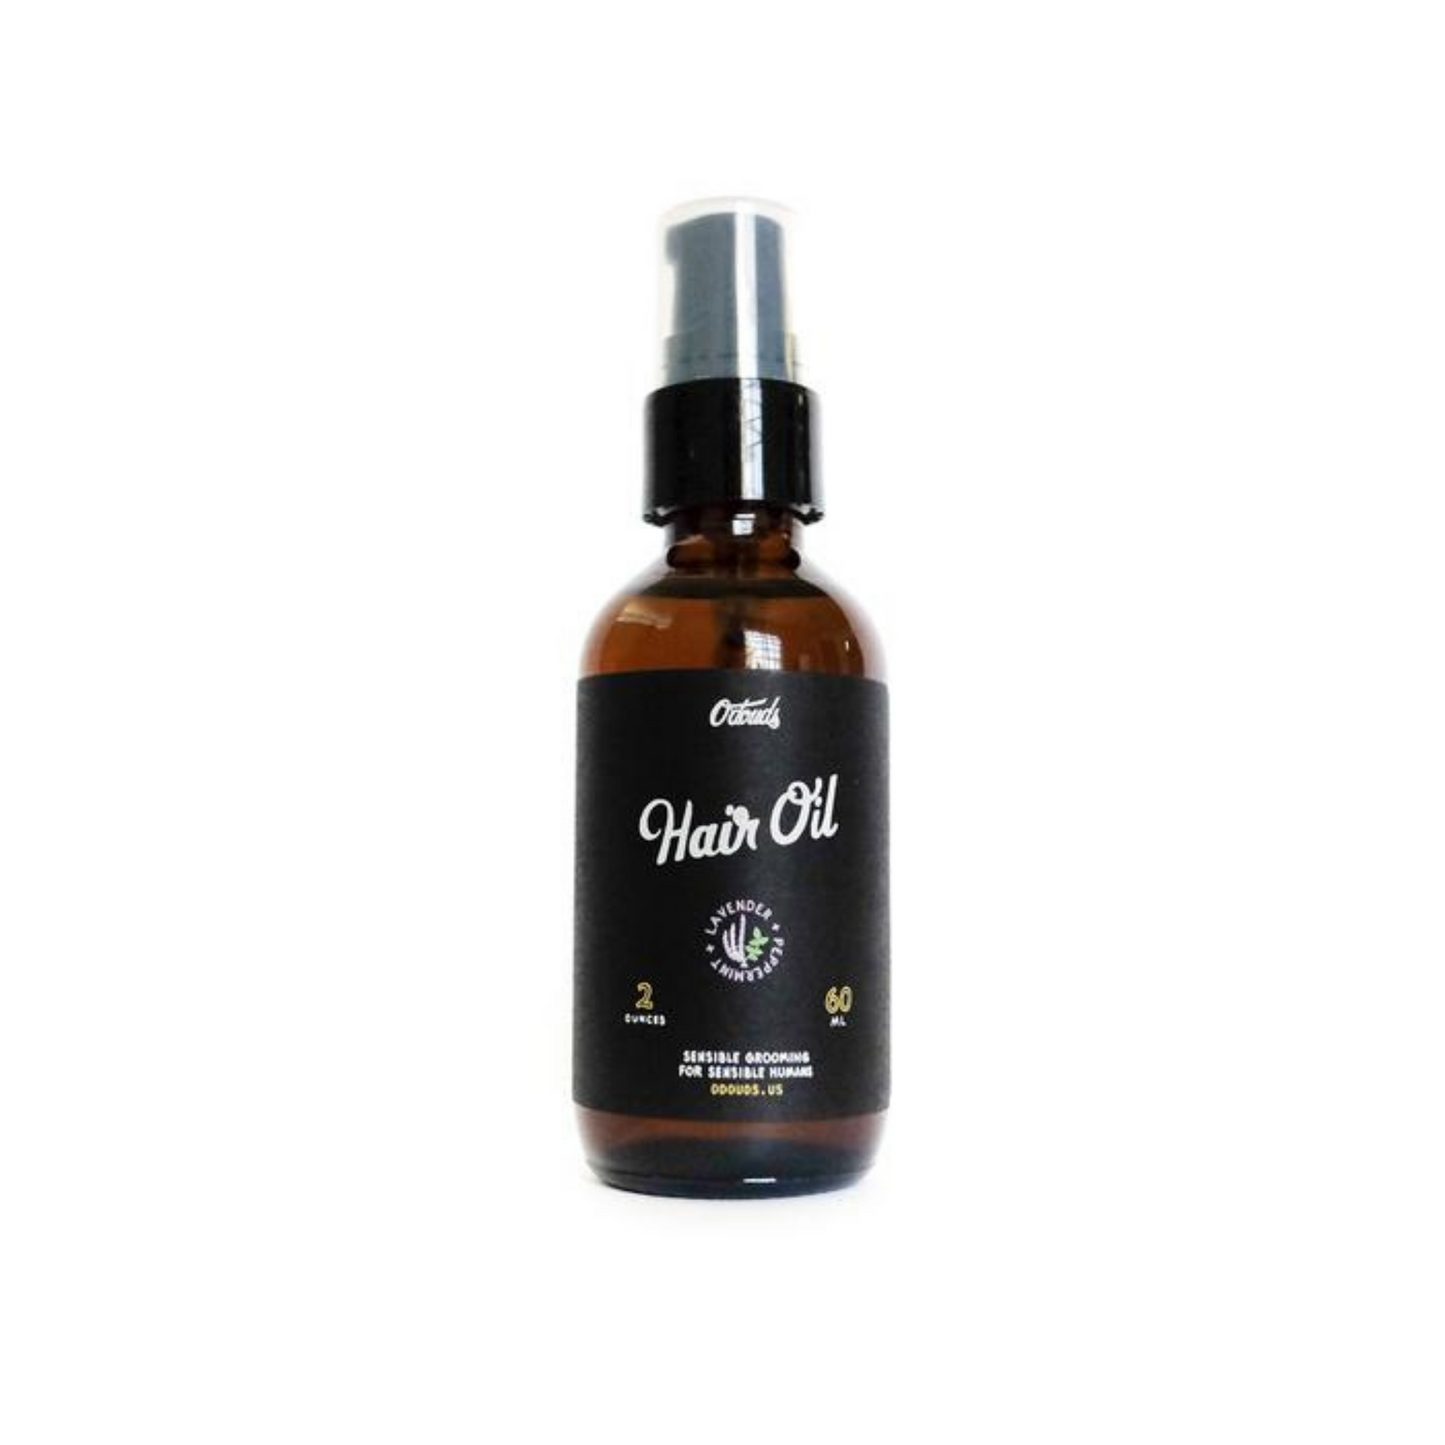 Primary Image of Apothecary Hair Oil